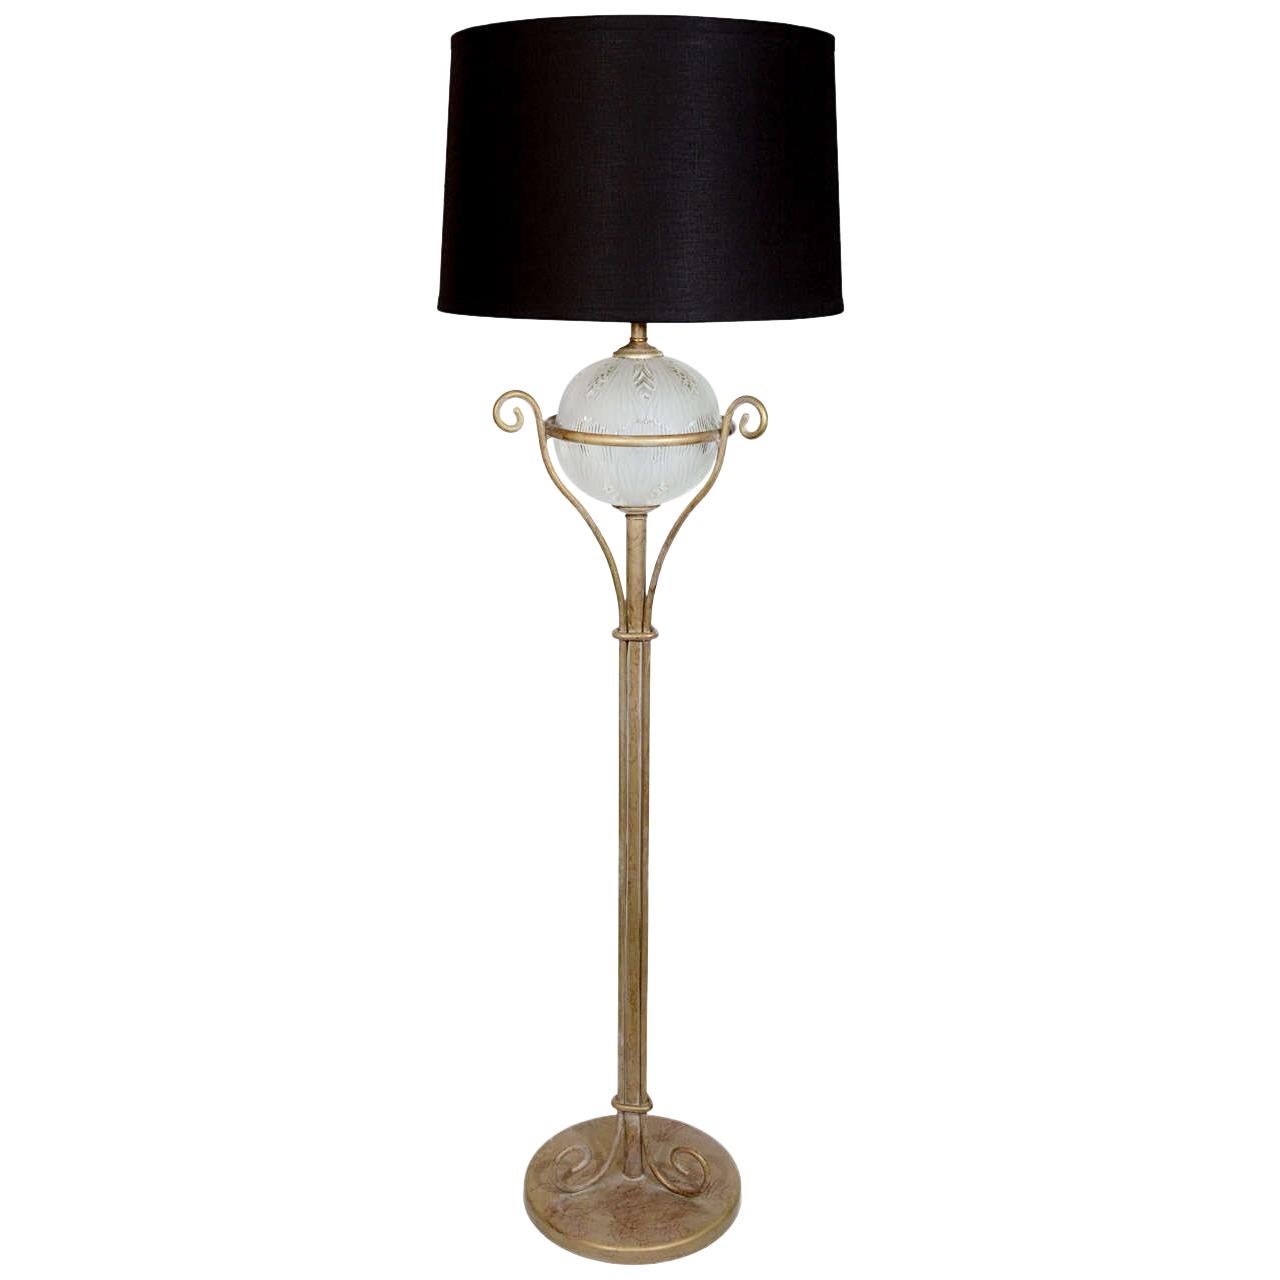 Gilded Art Deco Floor Lamp with Frosted Art Glass Globe, circa 1940 